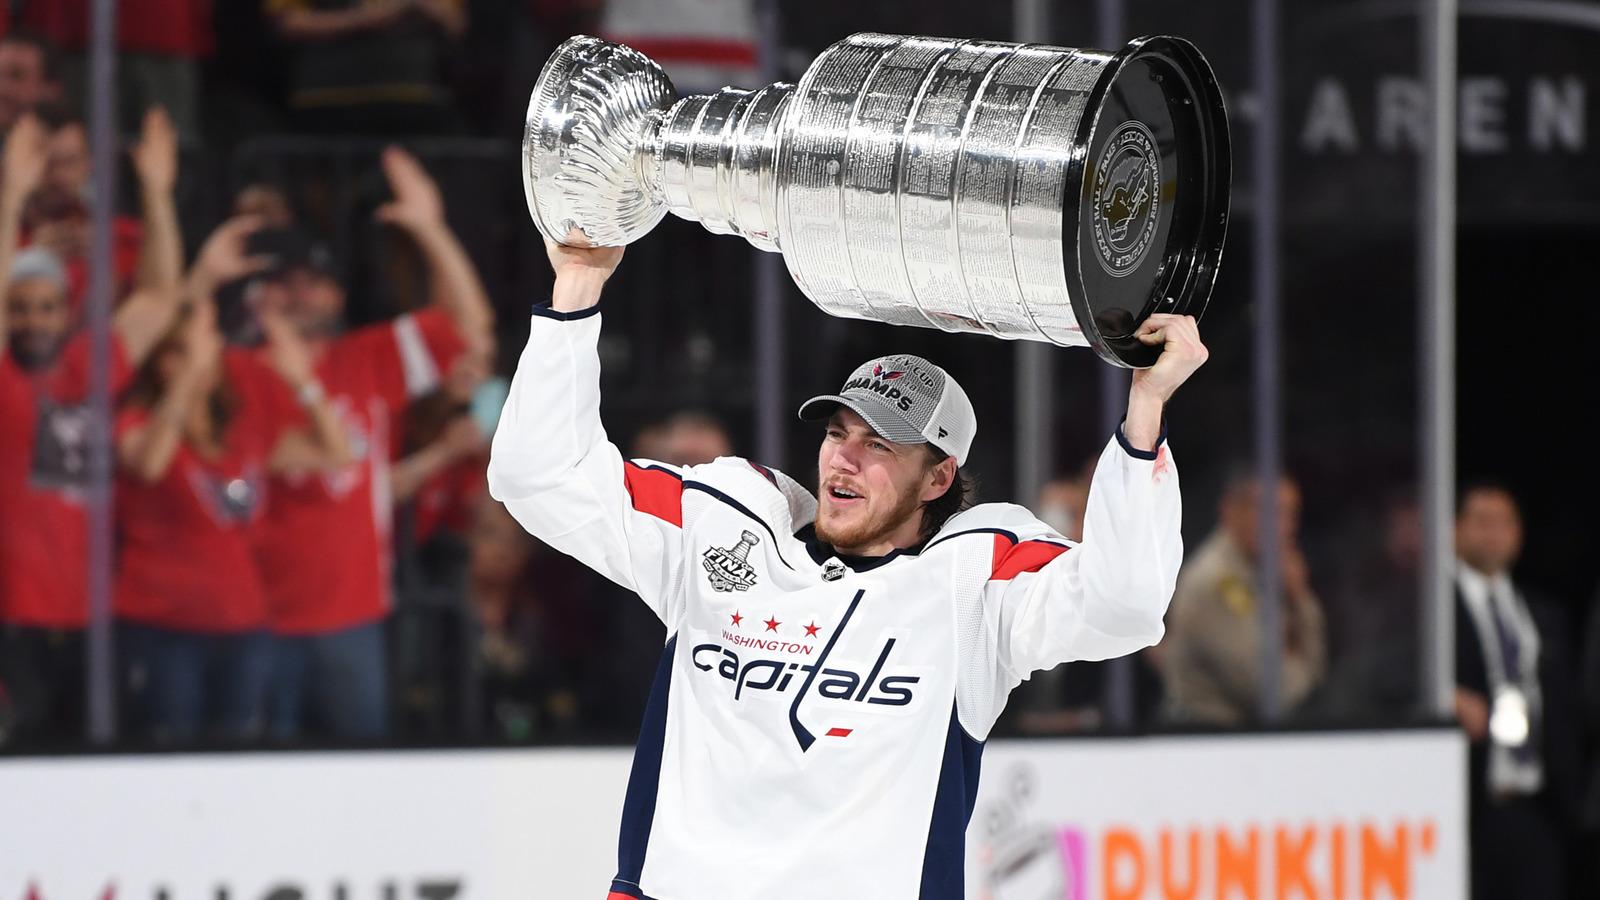 TJ Oshie has great quote about his father with Alzheimer's